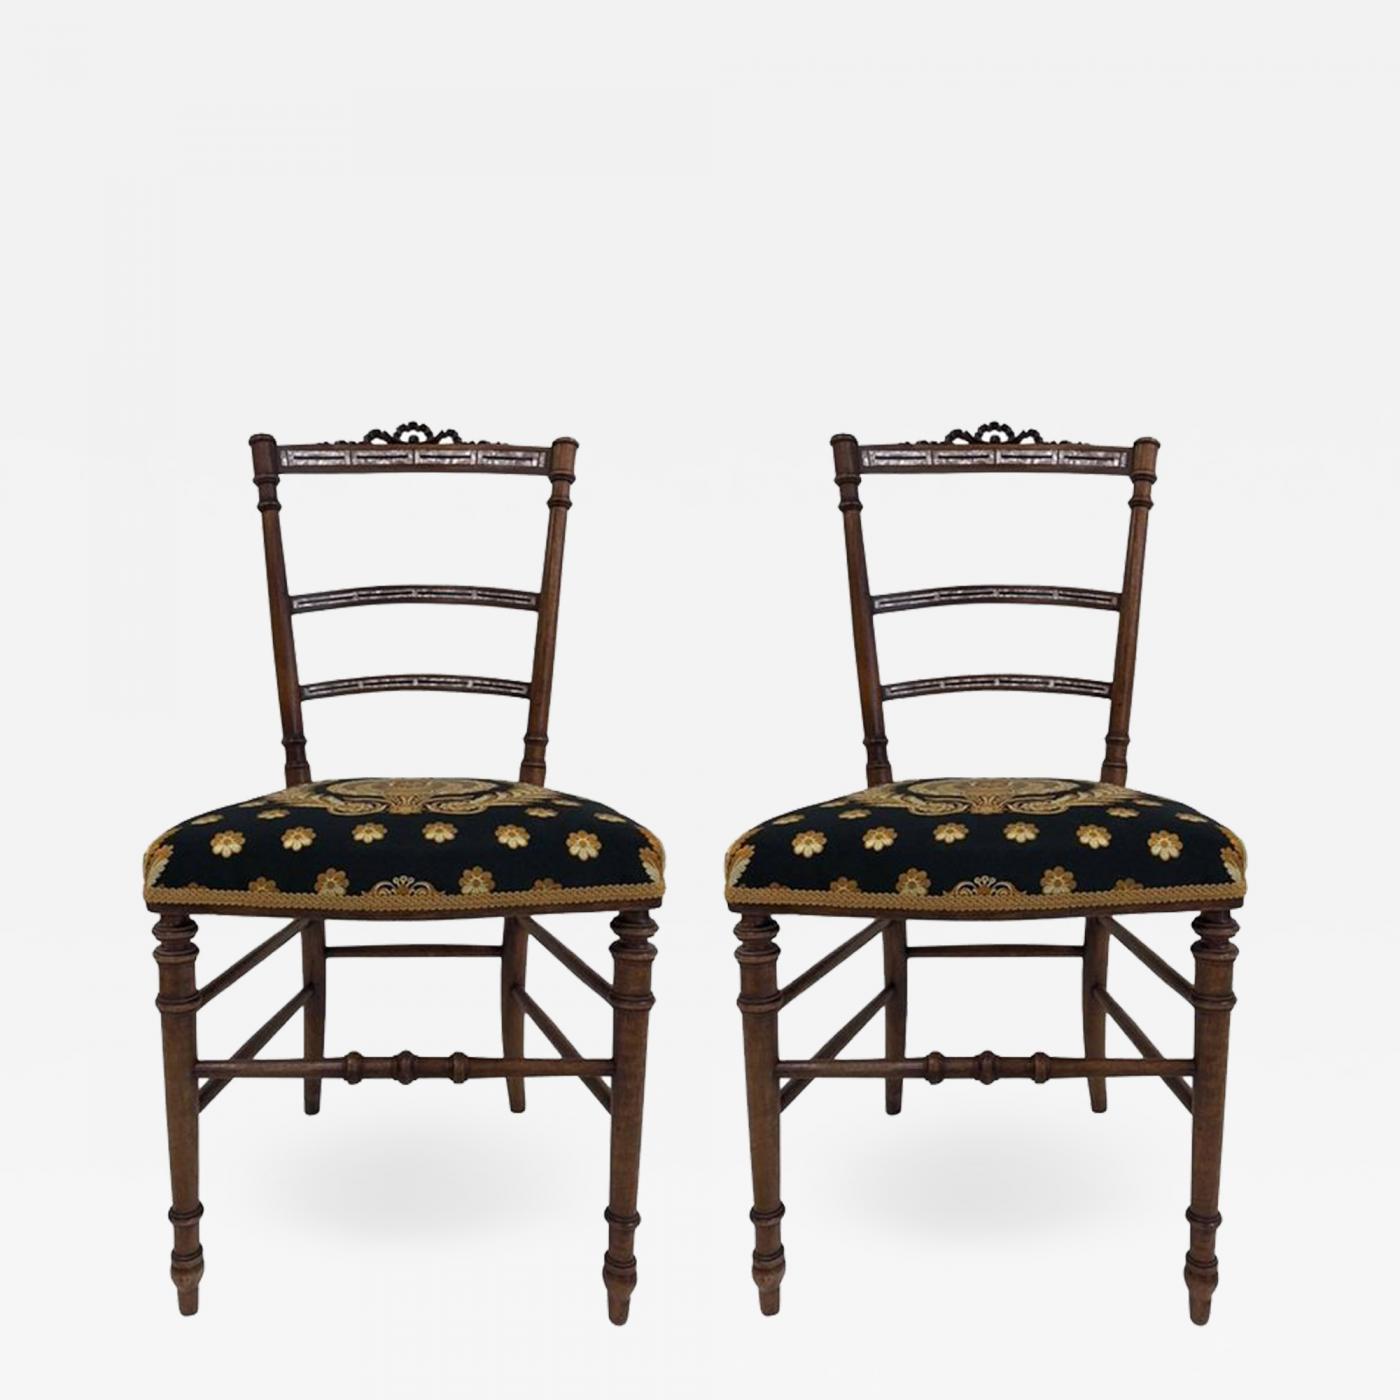 Pair Of Louis Xiv Style Mother Of Pearl Inlay Chairs